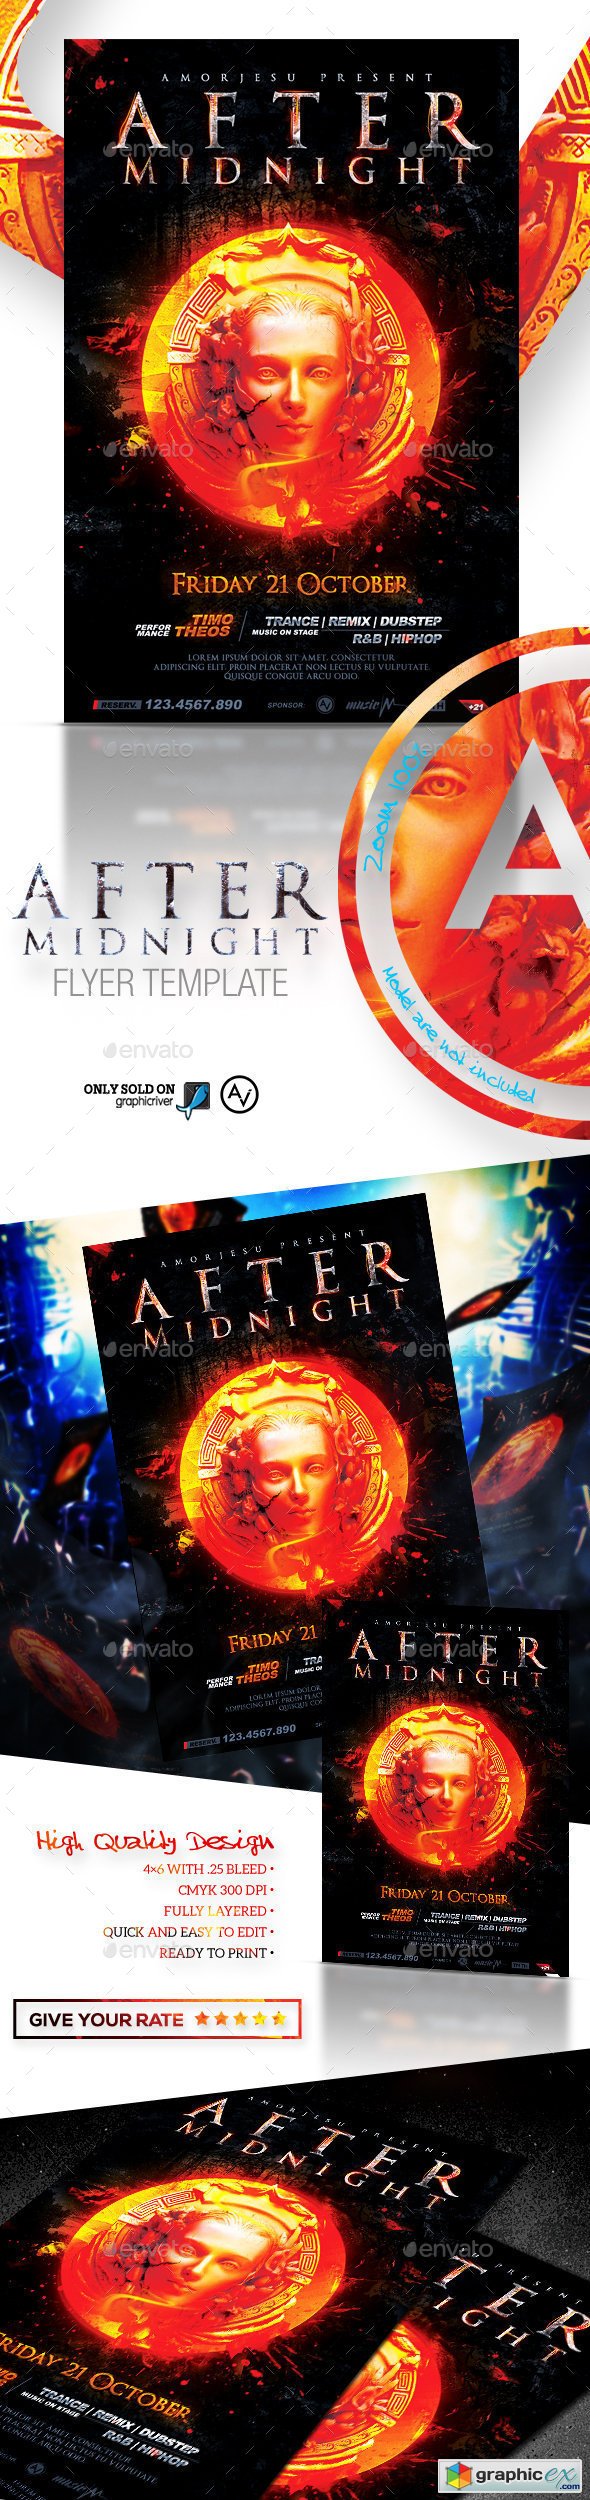 After Midnight Flyer Template